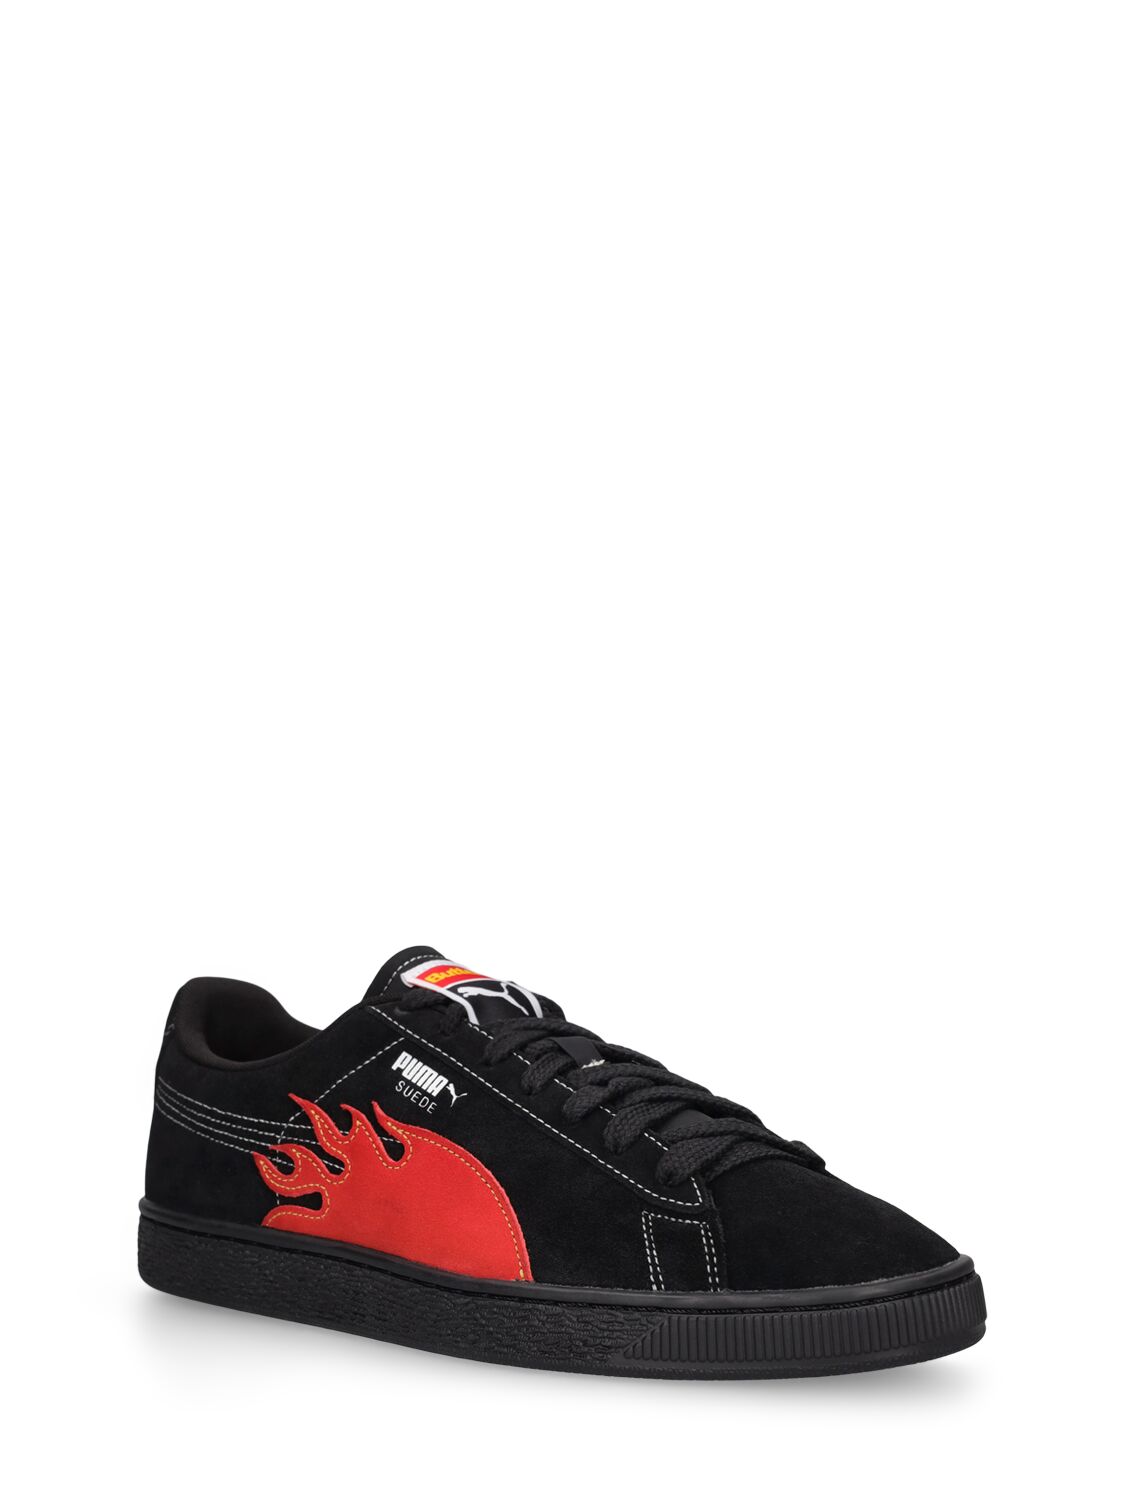 Shop Puma Butter Goods Classic Suede Sneakers In Black,red